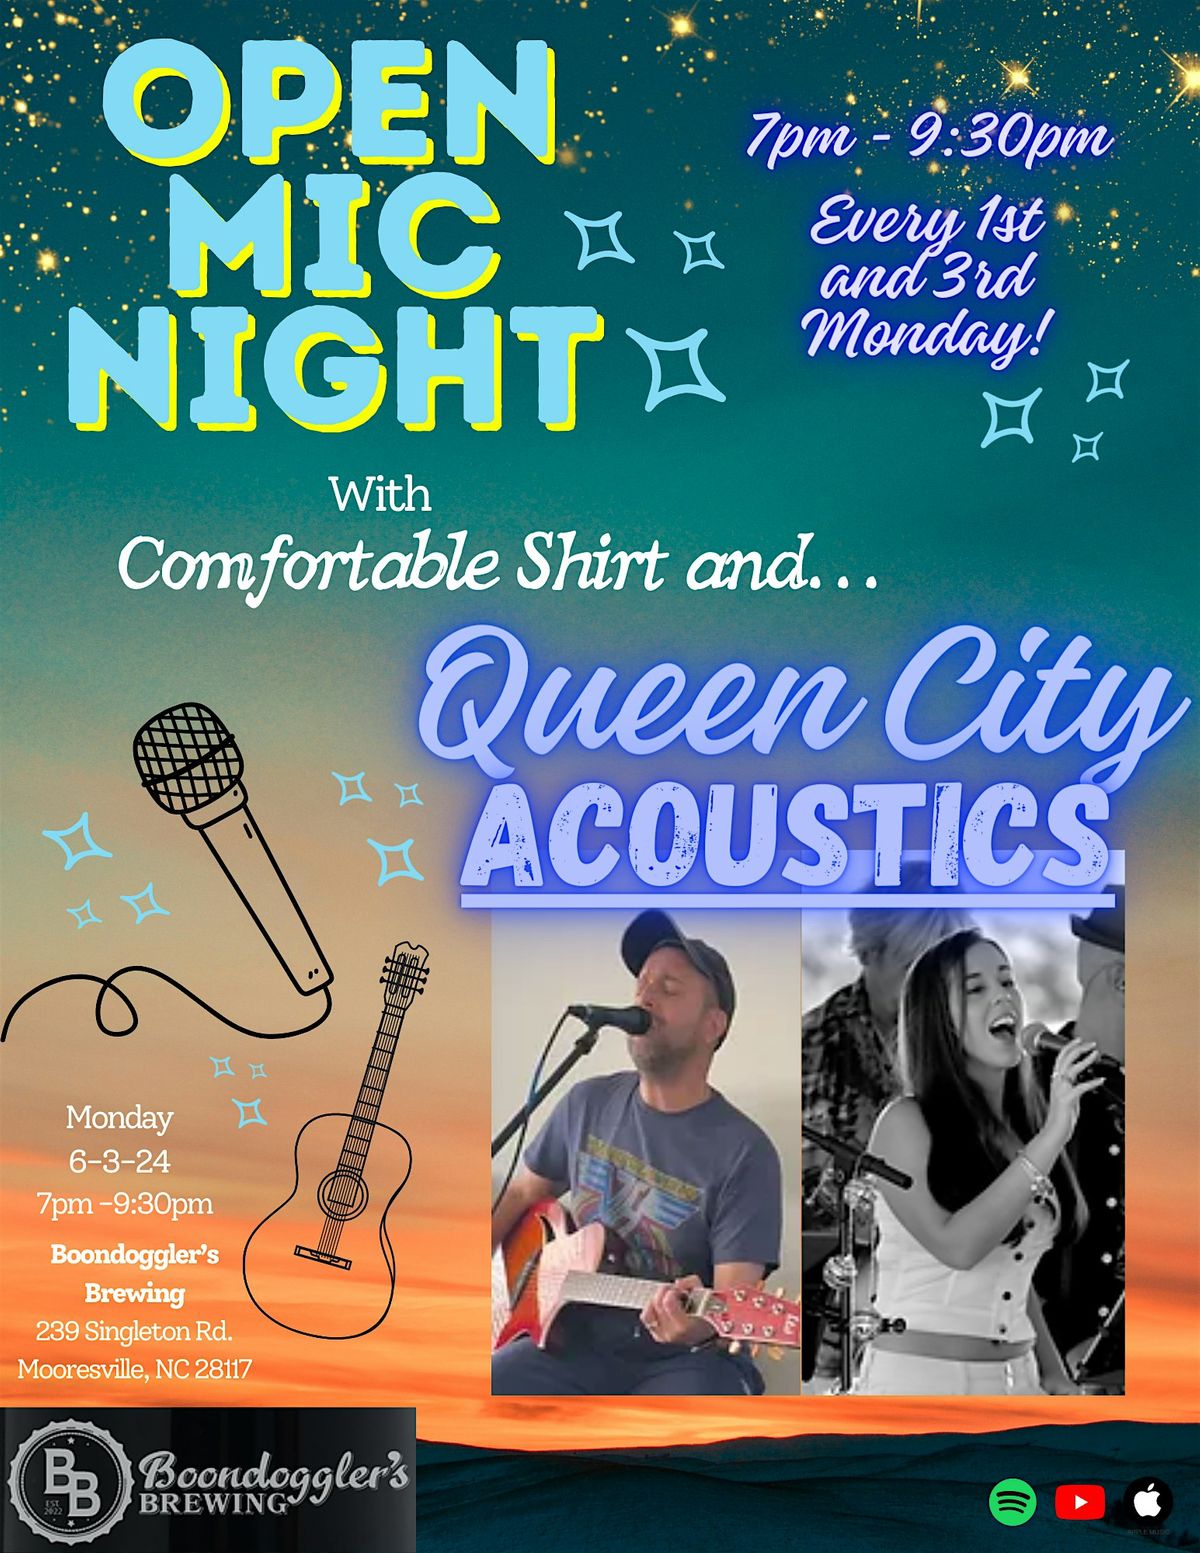 Open Mic at Boondoggler's Brewing featuring Queen City Acoustics